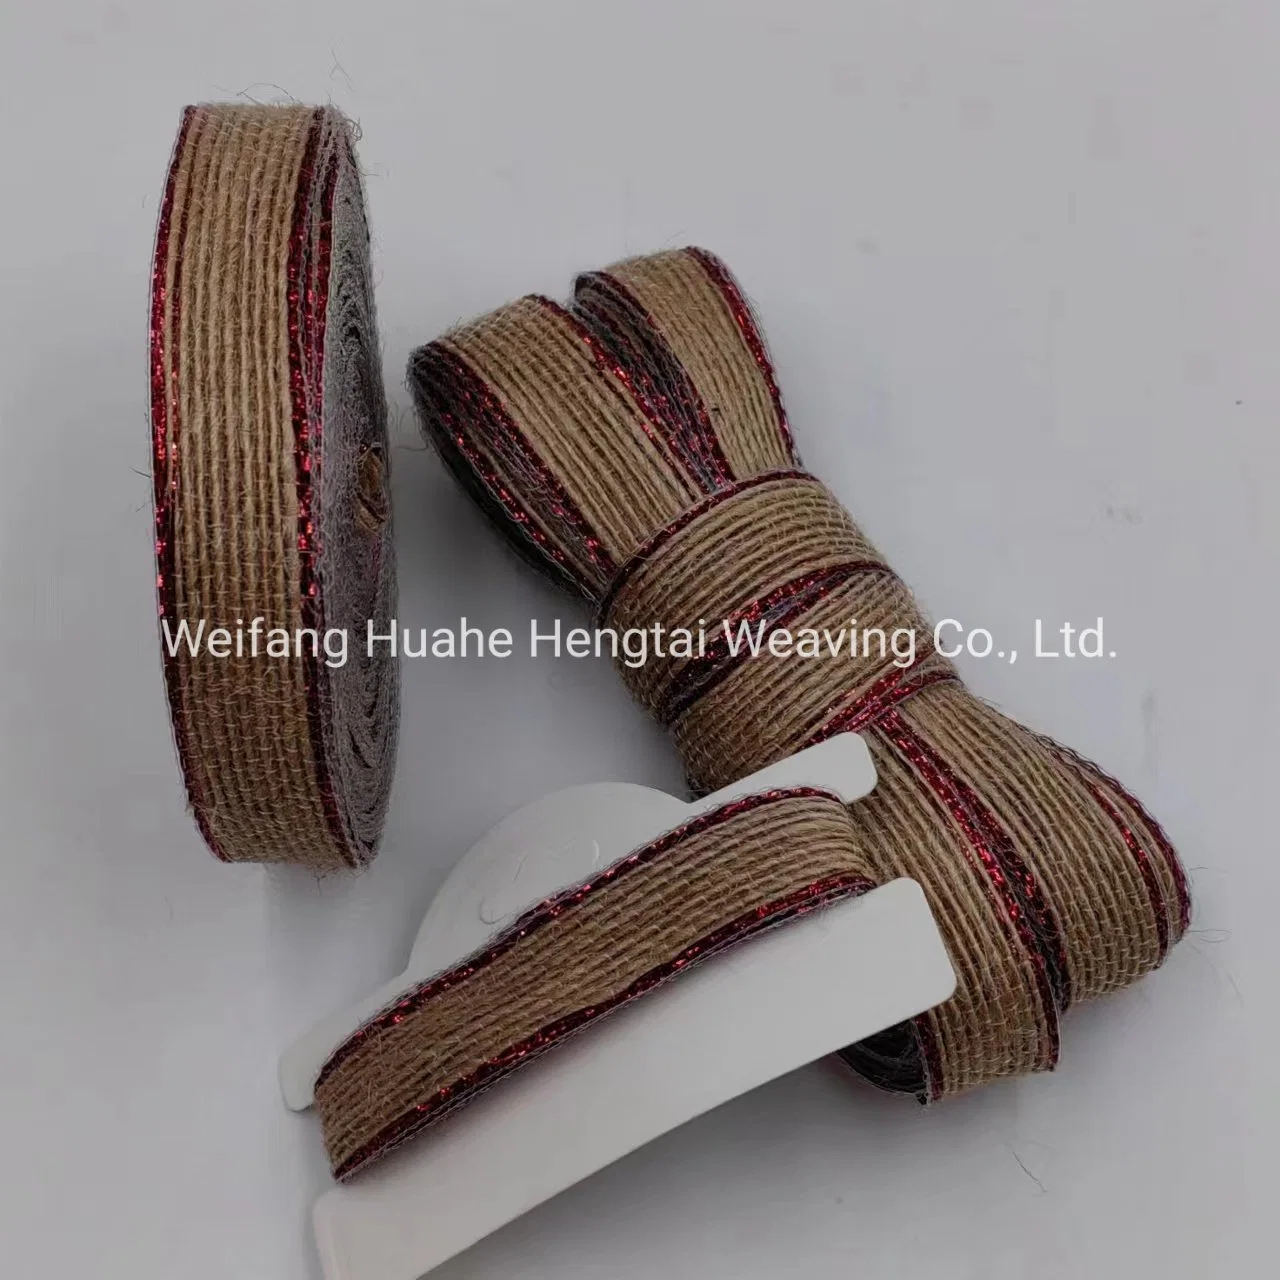 Wholesale of New Colored Fishing Thread Jute Webbing Gift Gift Decorative Belt